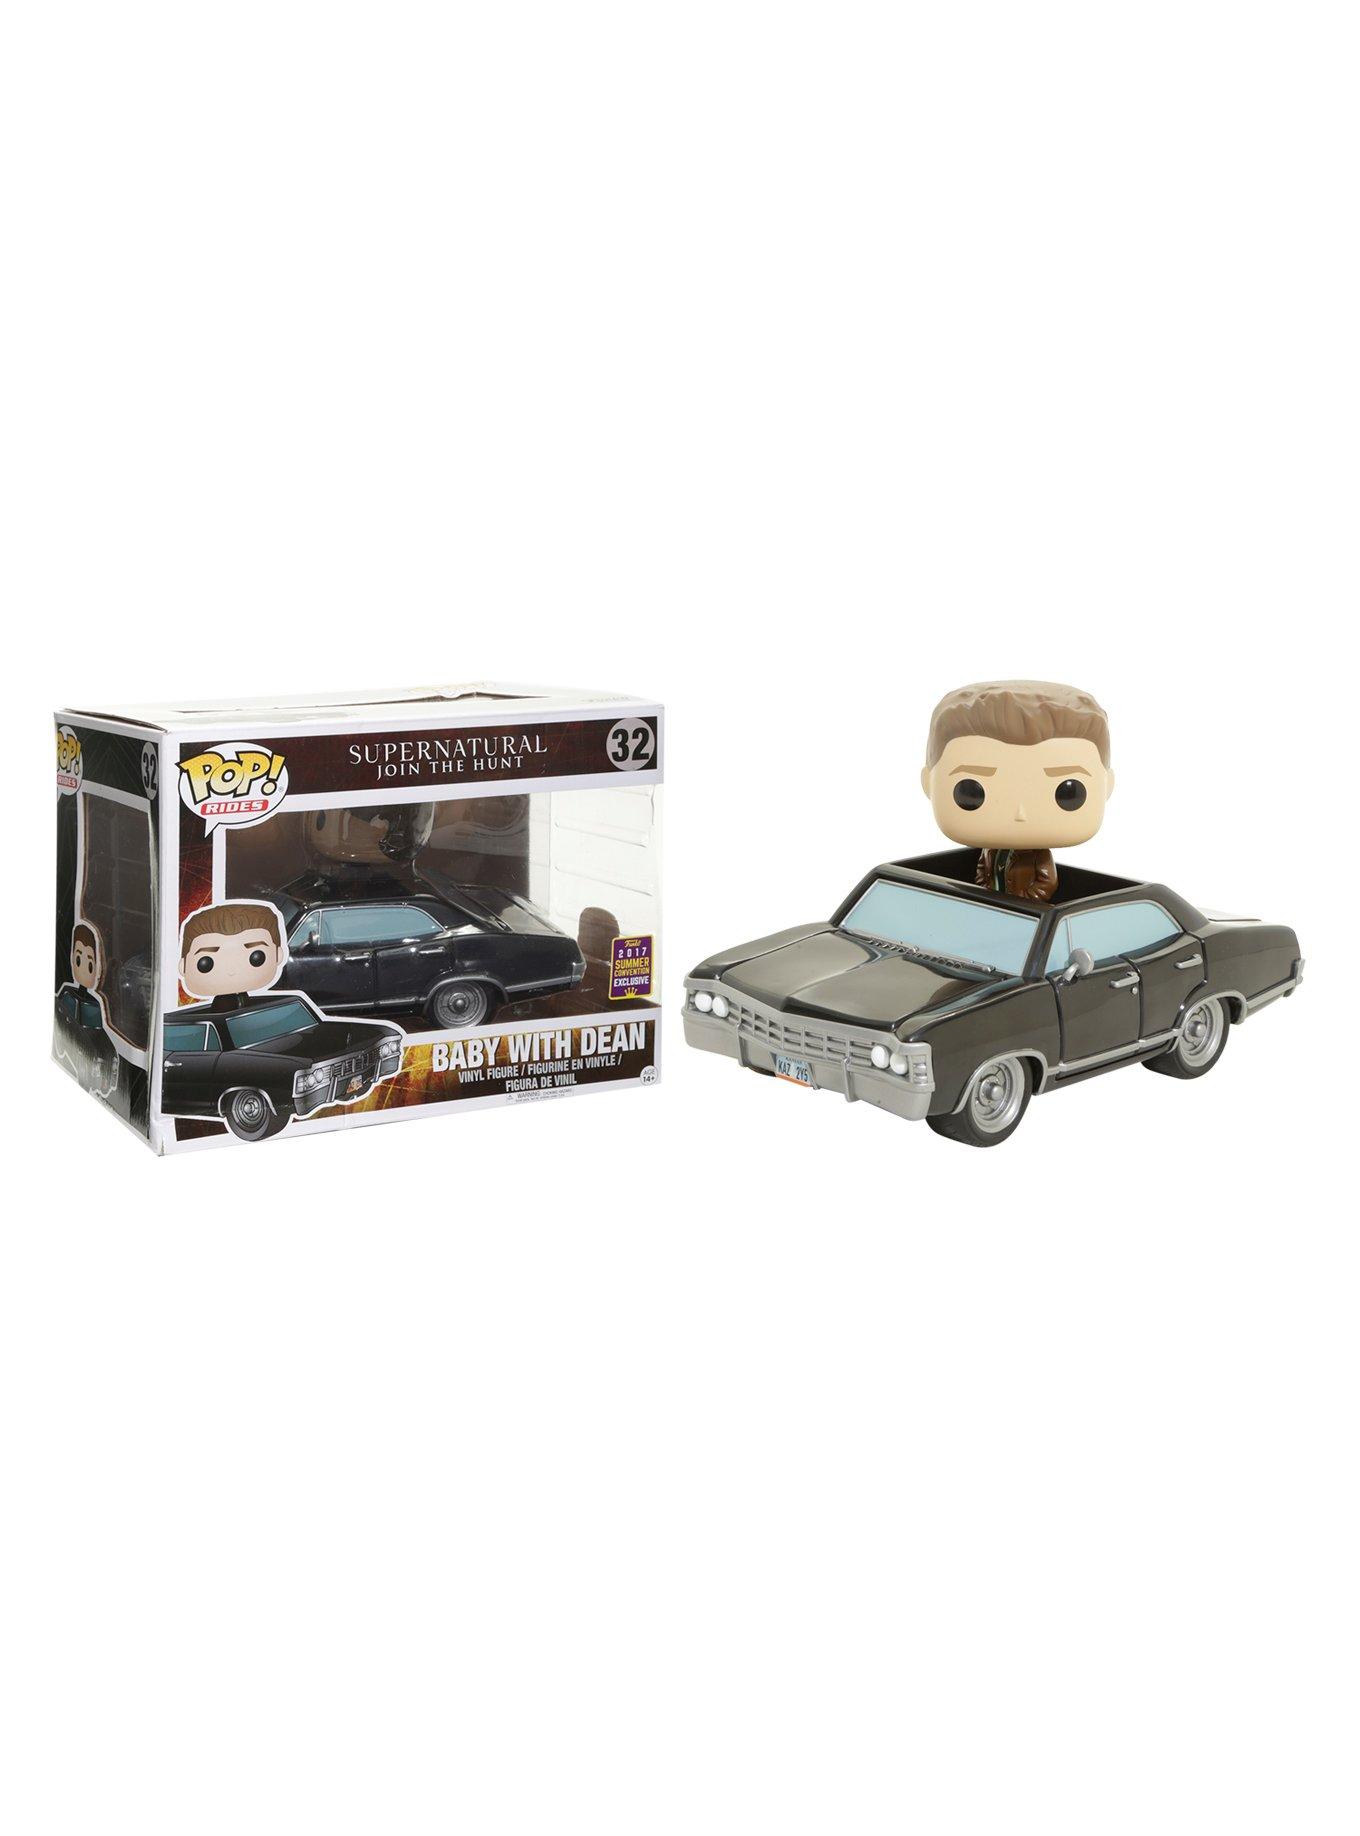 Funko Supernatural Pop! Rides Baby With Dean 6 Inch Vinyl Figure 2017 Summer Convention Exclusive, , hi-res